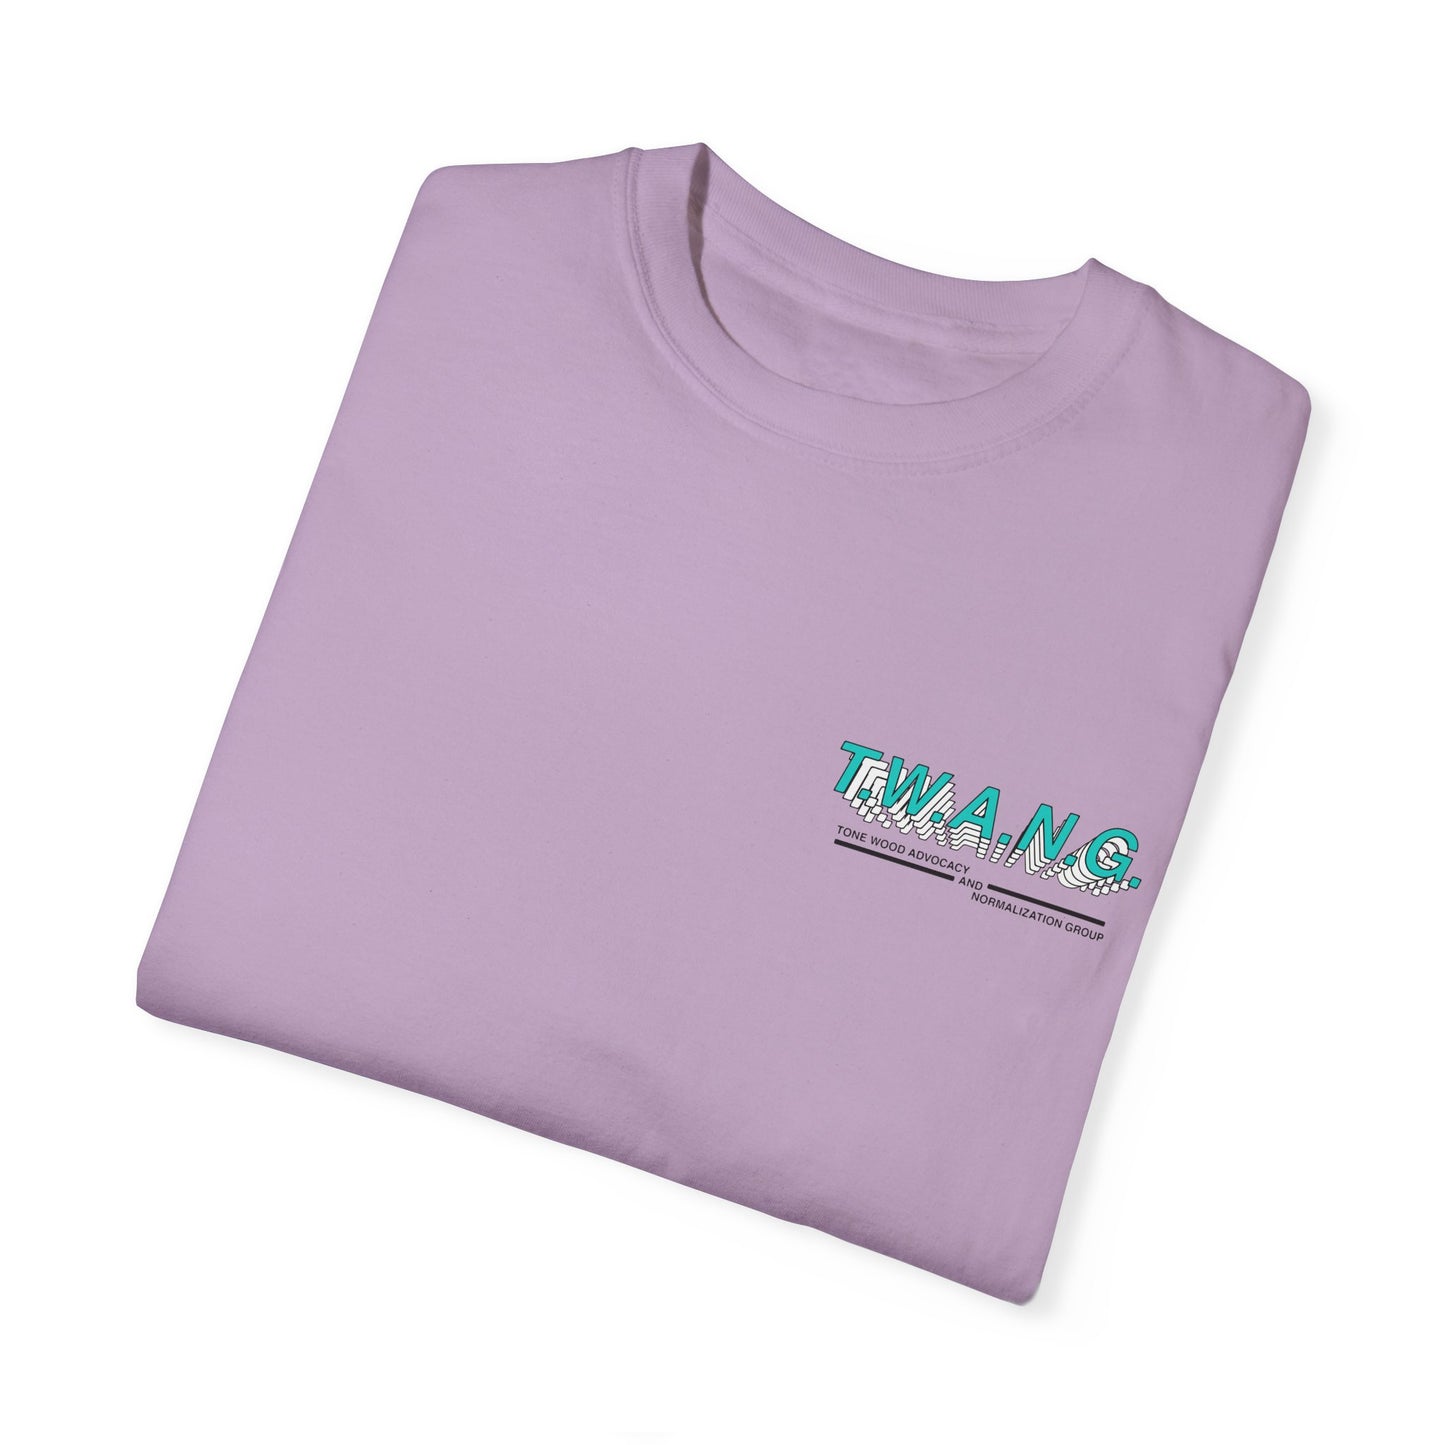 T.W.A.N.G. Mid-weight T-shirt (Unisex)